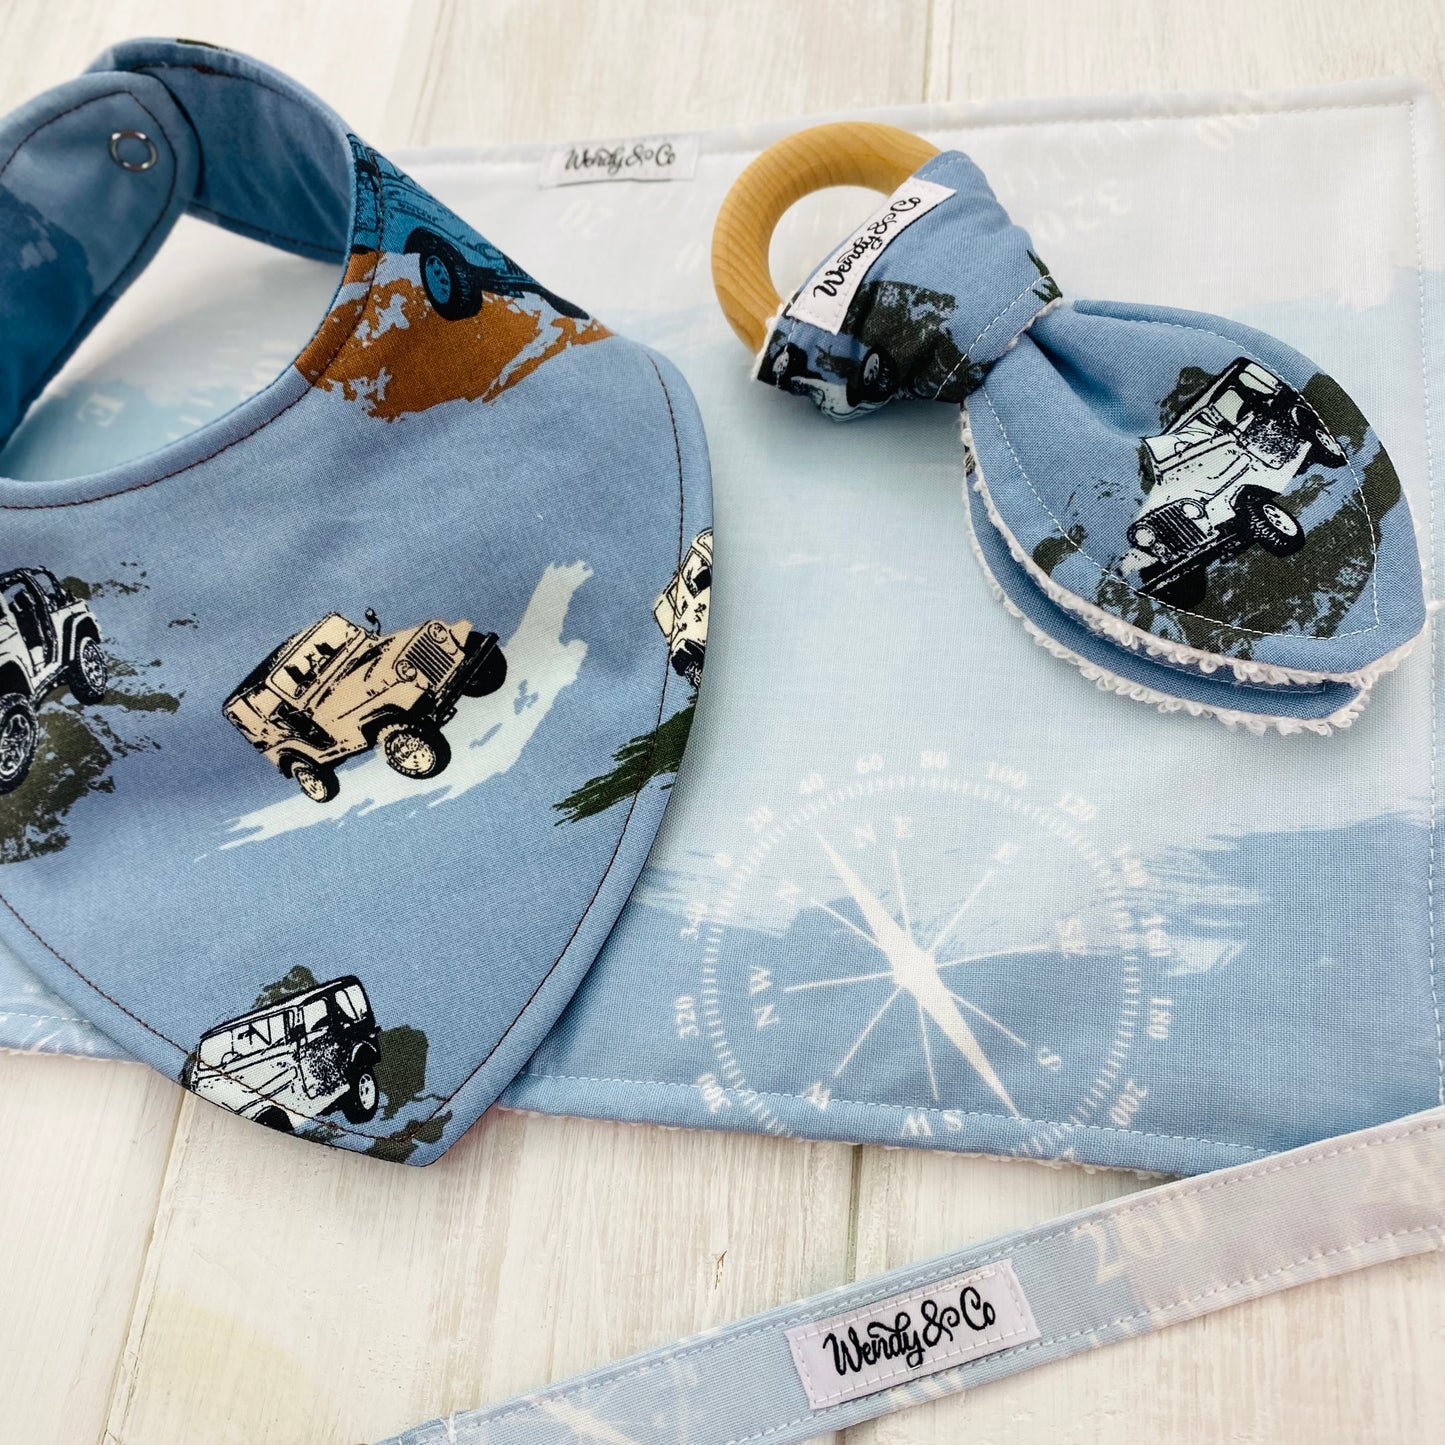 Handmade baby gift set with jeeps.